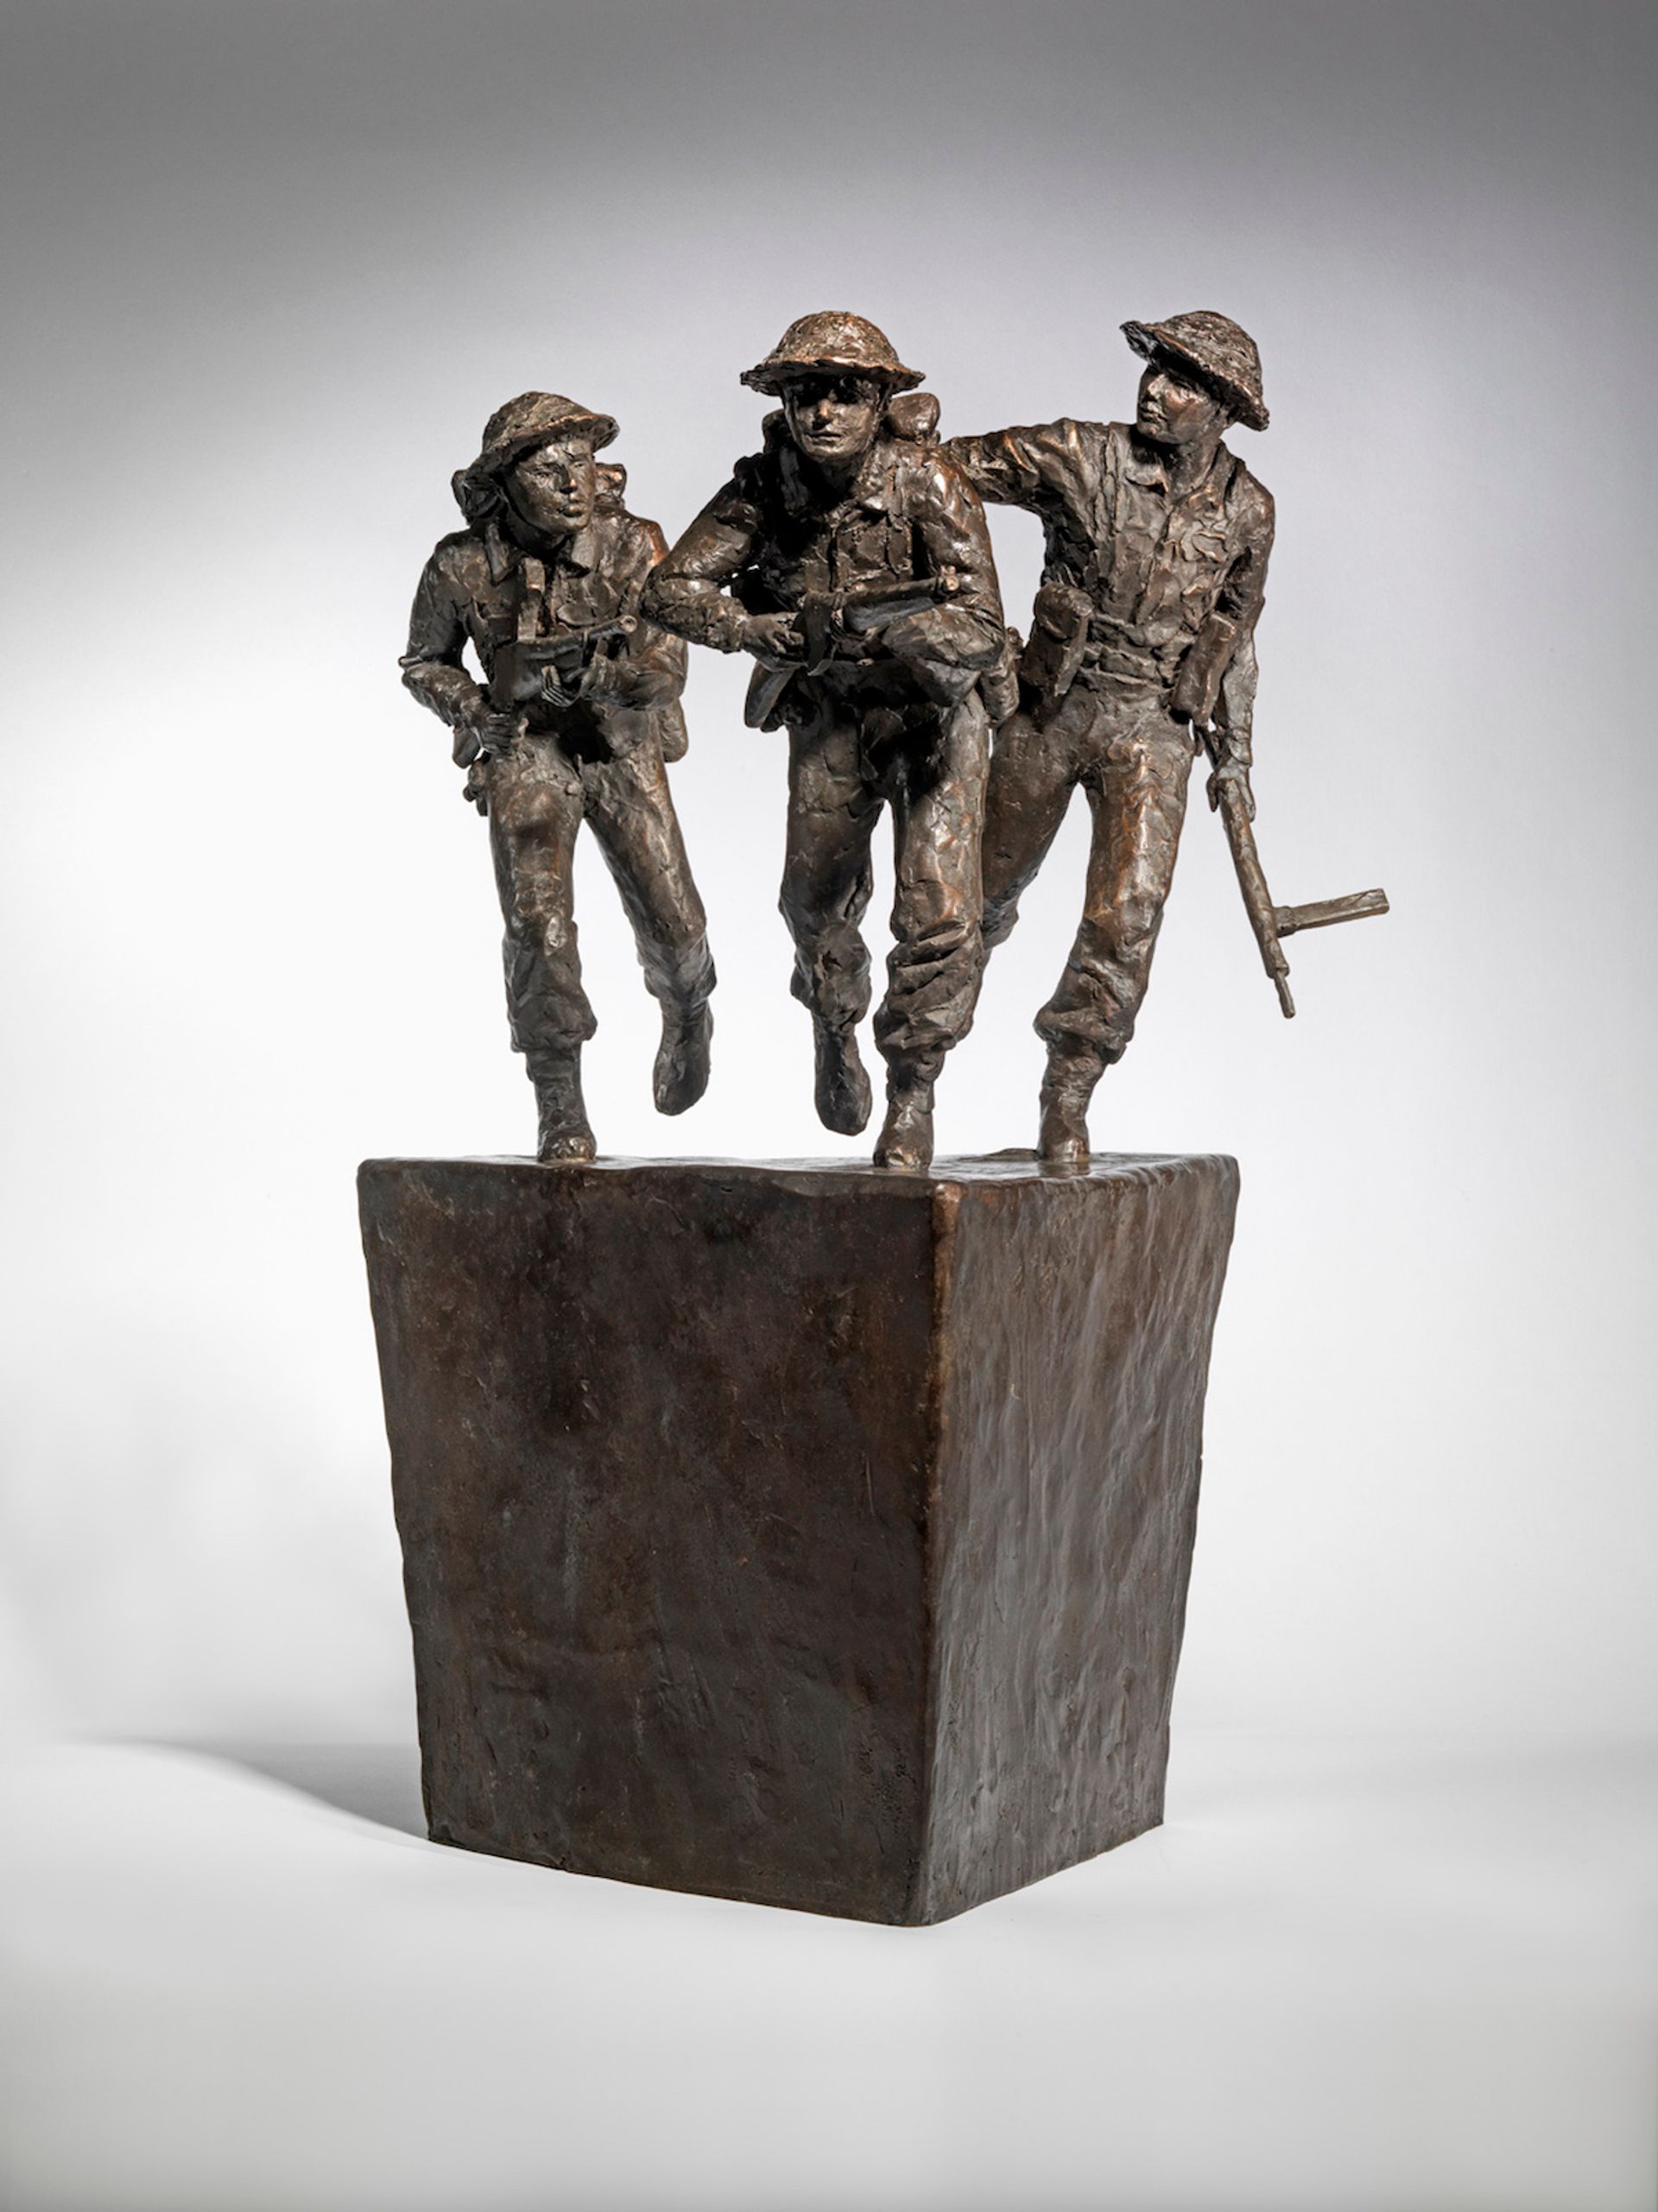 Maquette of the forthcoming Normandy landings memorial by David William-Ellis Image courtesy of Portland Gallery